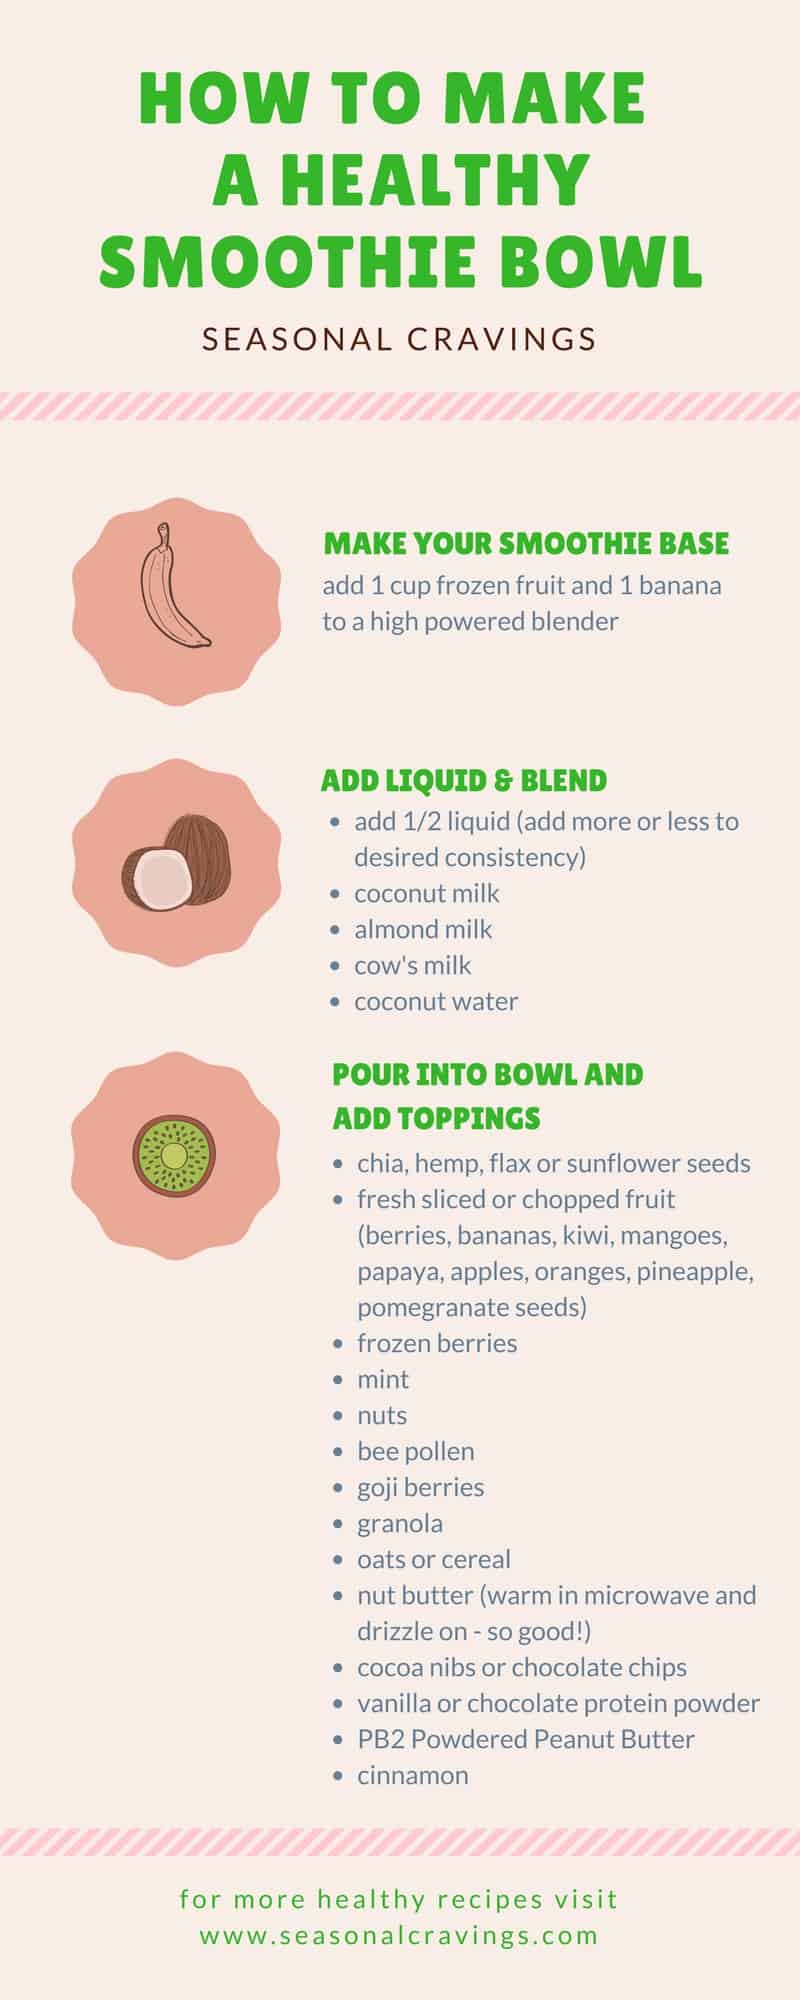 How to Make a Healthy Smoothie Bowl infographic